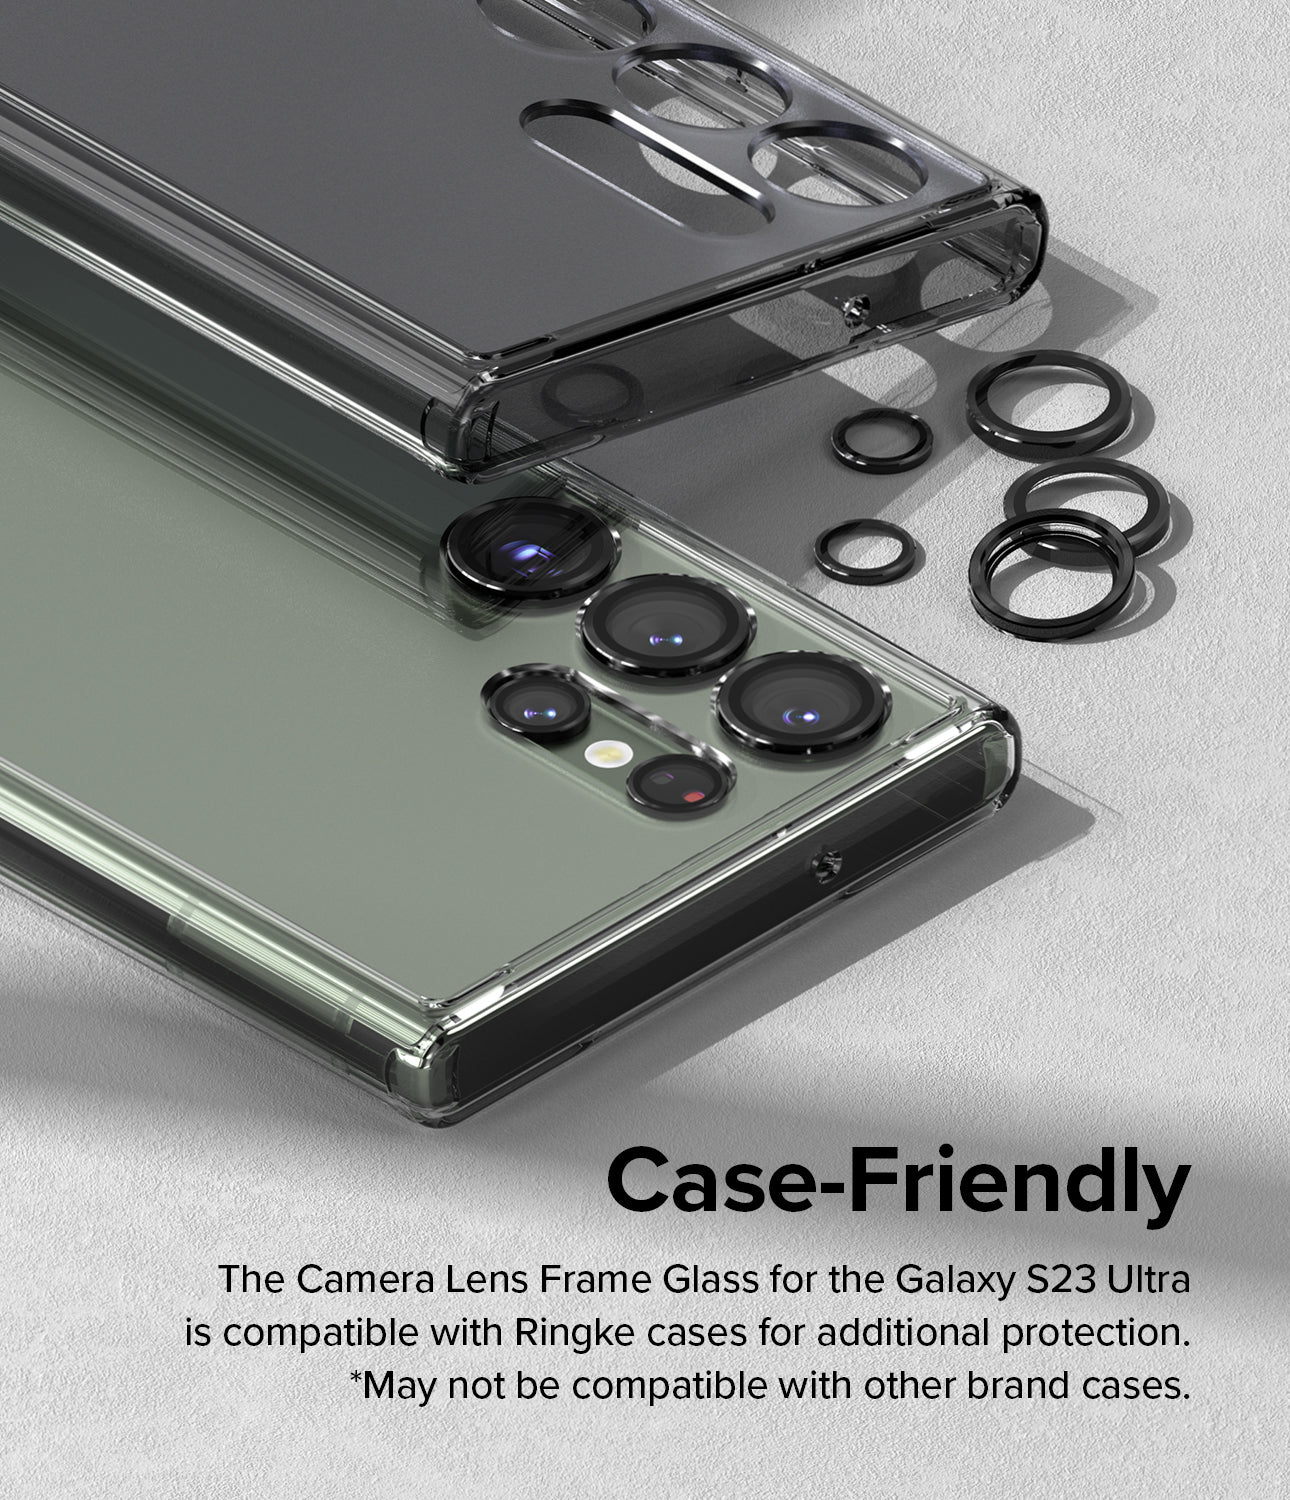 Case-Friendly l The Camera Lens Frame Glass for the Galaxy S23 Ultra is compatible with Ringke cases for additional protection. * May not be compatible with other brand cases.